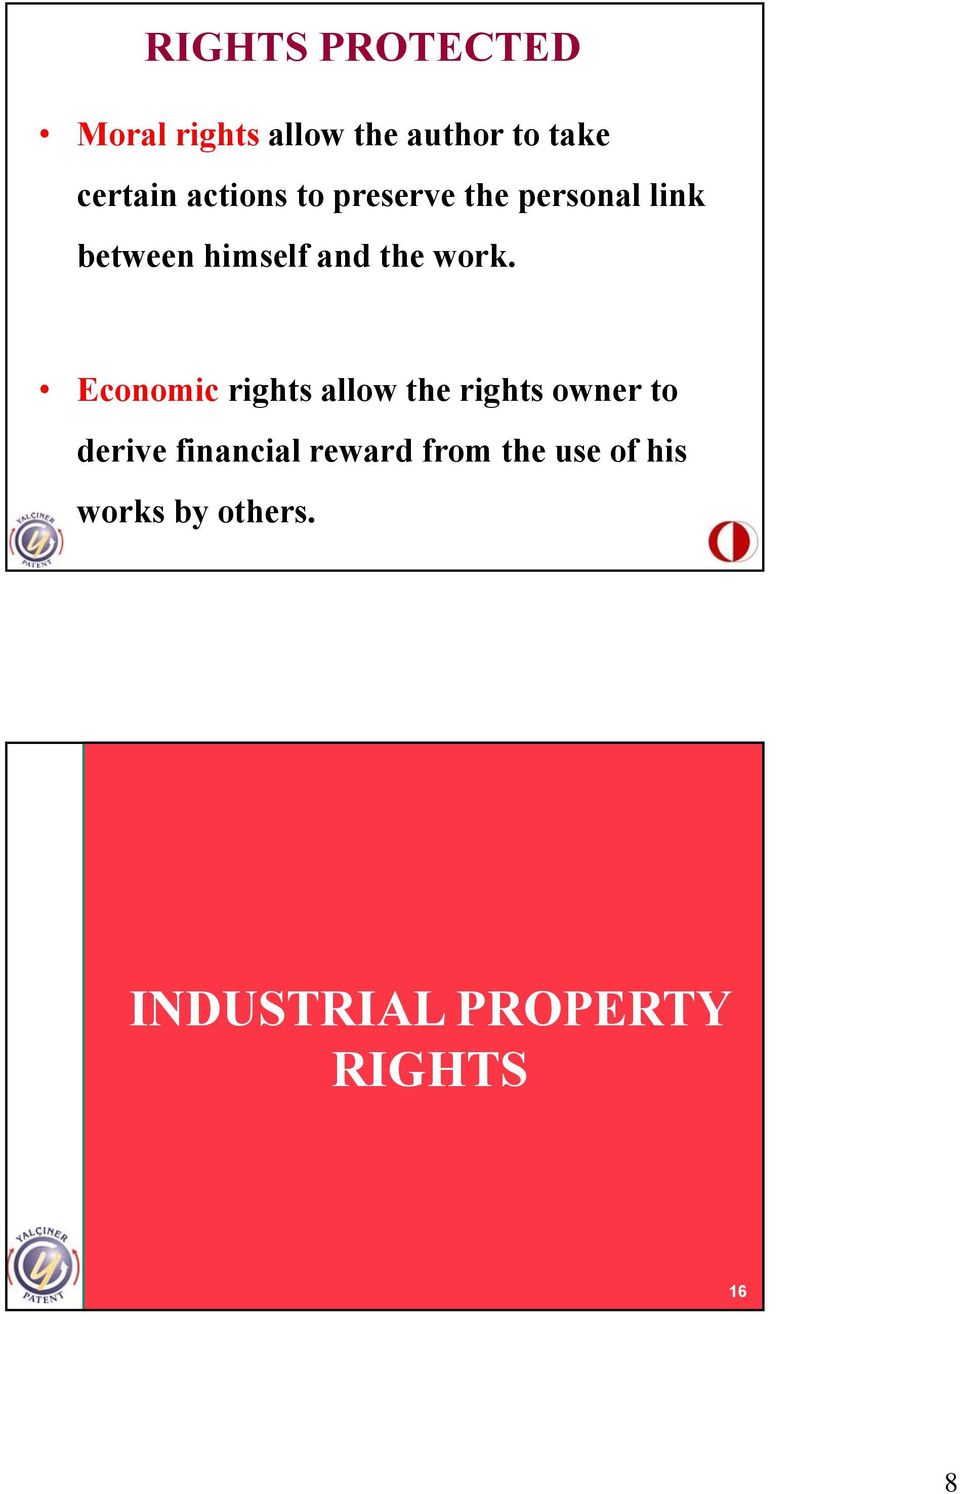 Economic rights allow the rights owner to derive financial reward